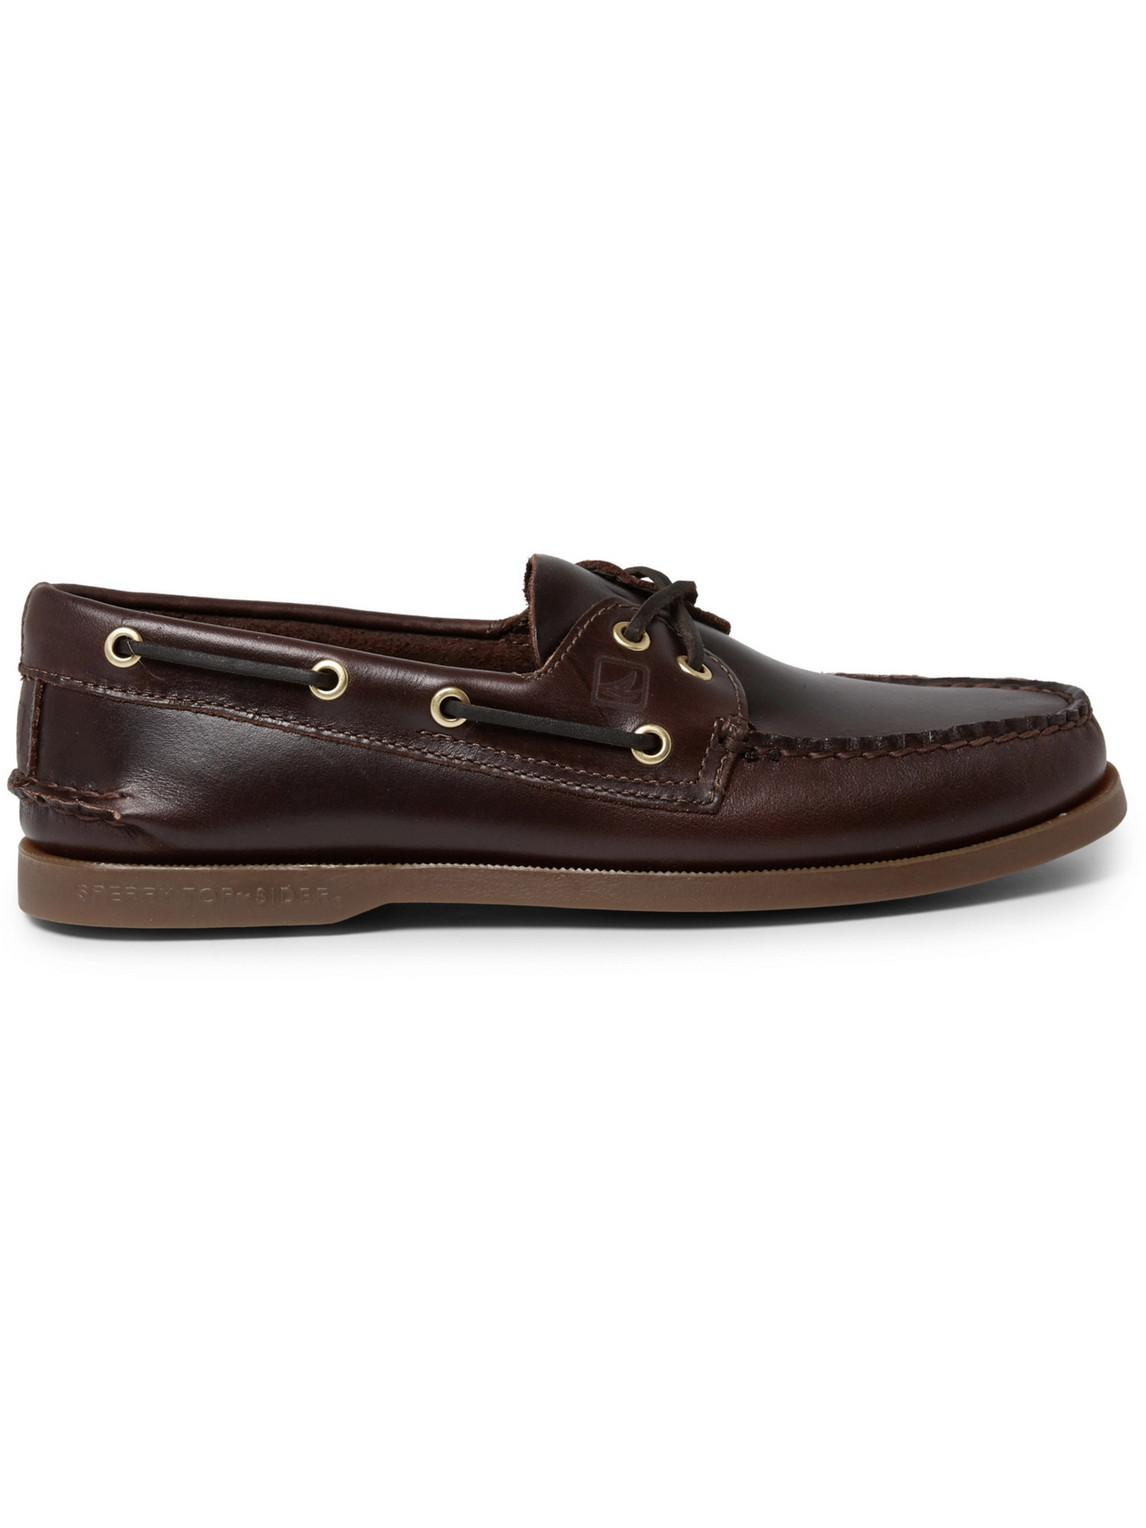 SPERRY AUTHENTIC ORIGINAL BURNISHED-LEATHER BOAT SHOES